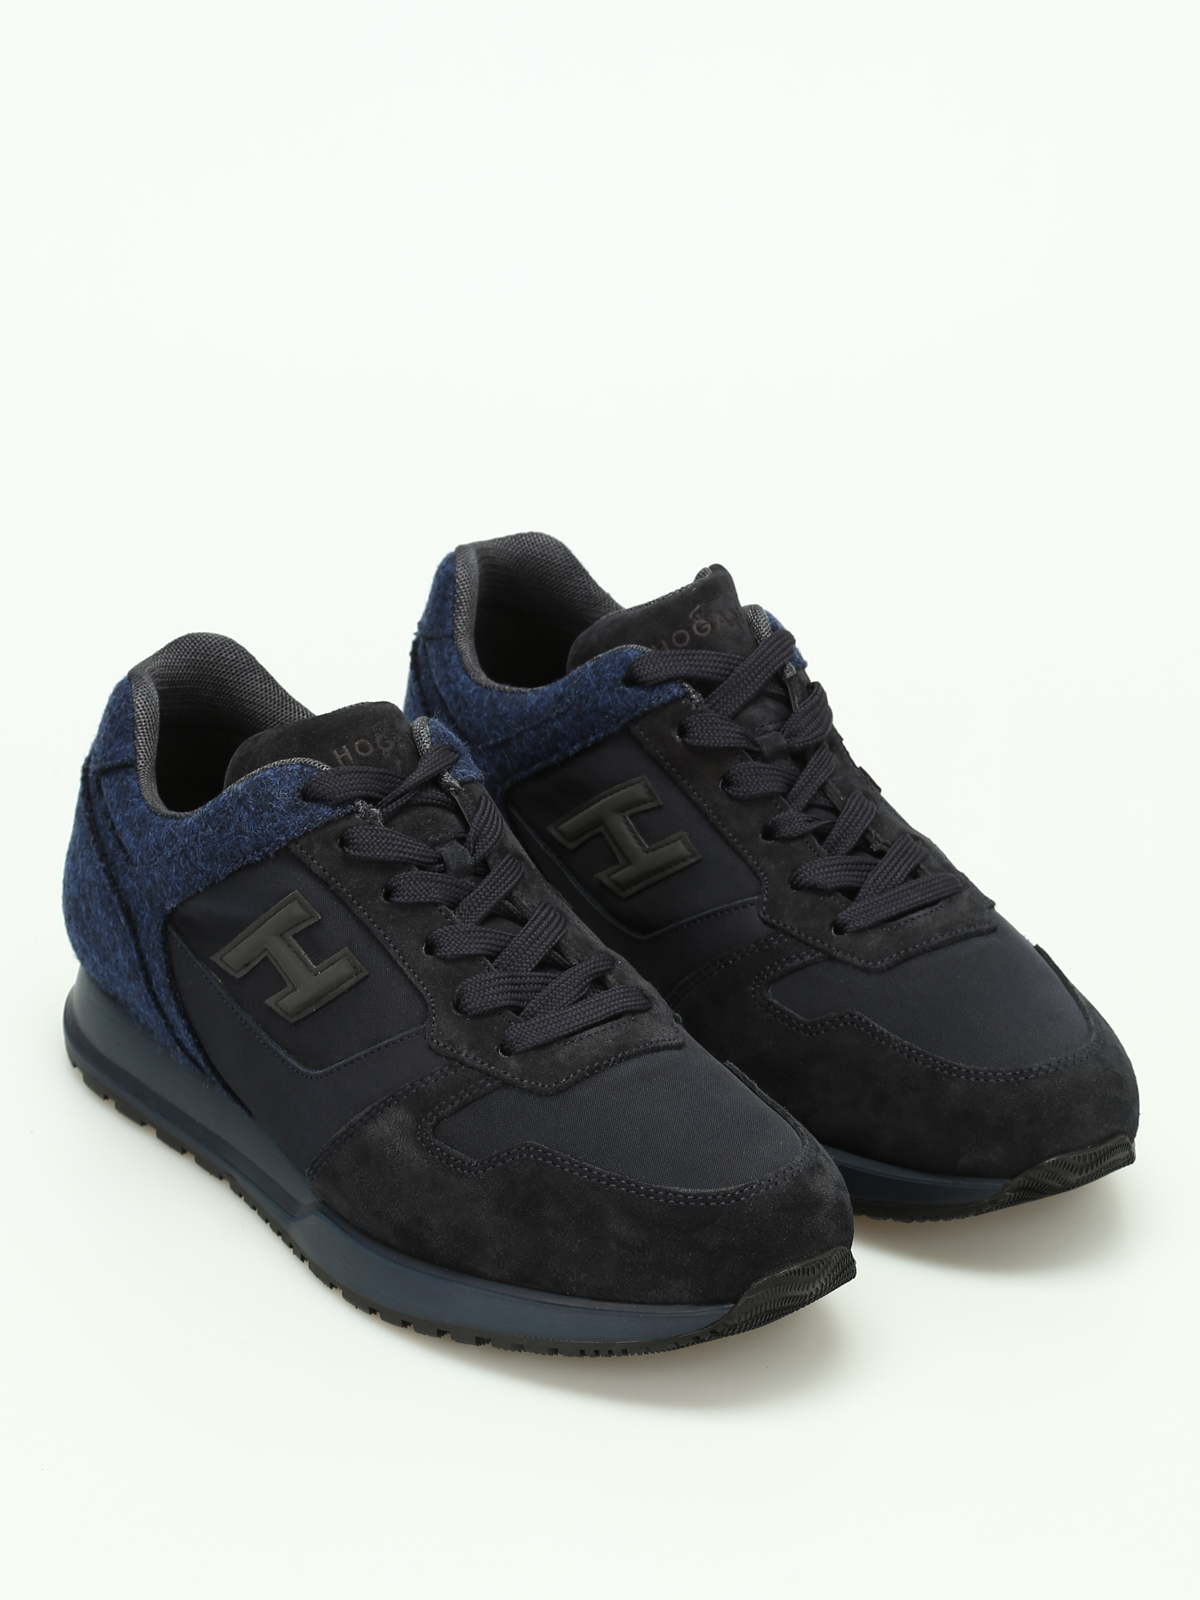 Hogan - H321 felt and suede sneakers 